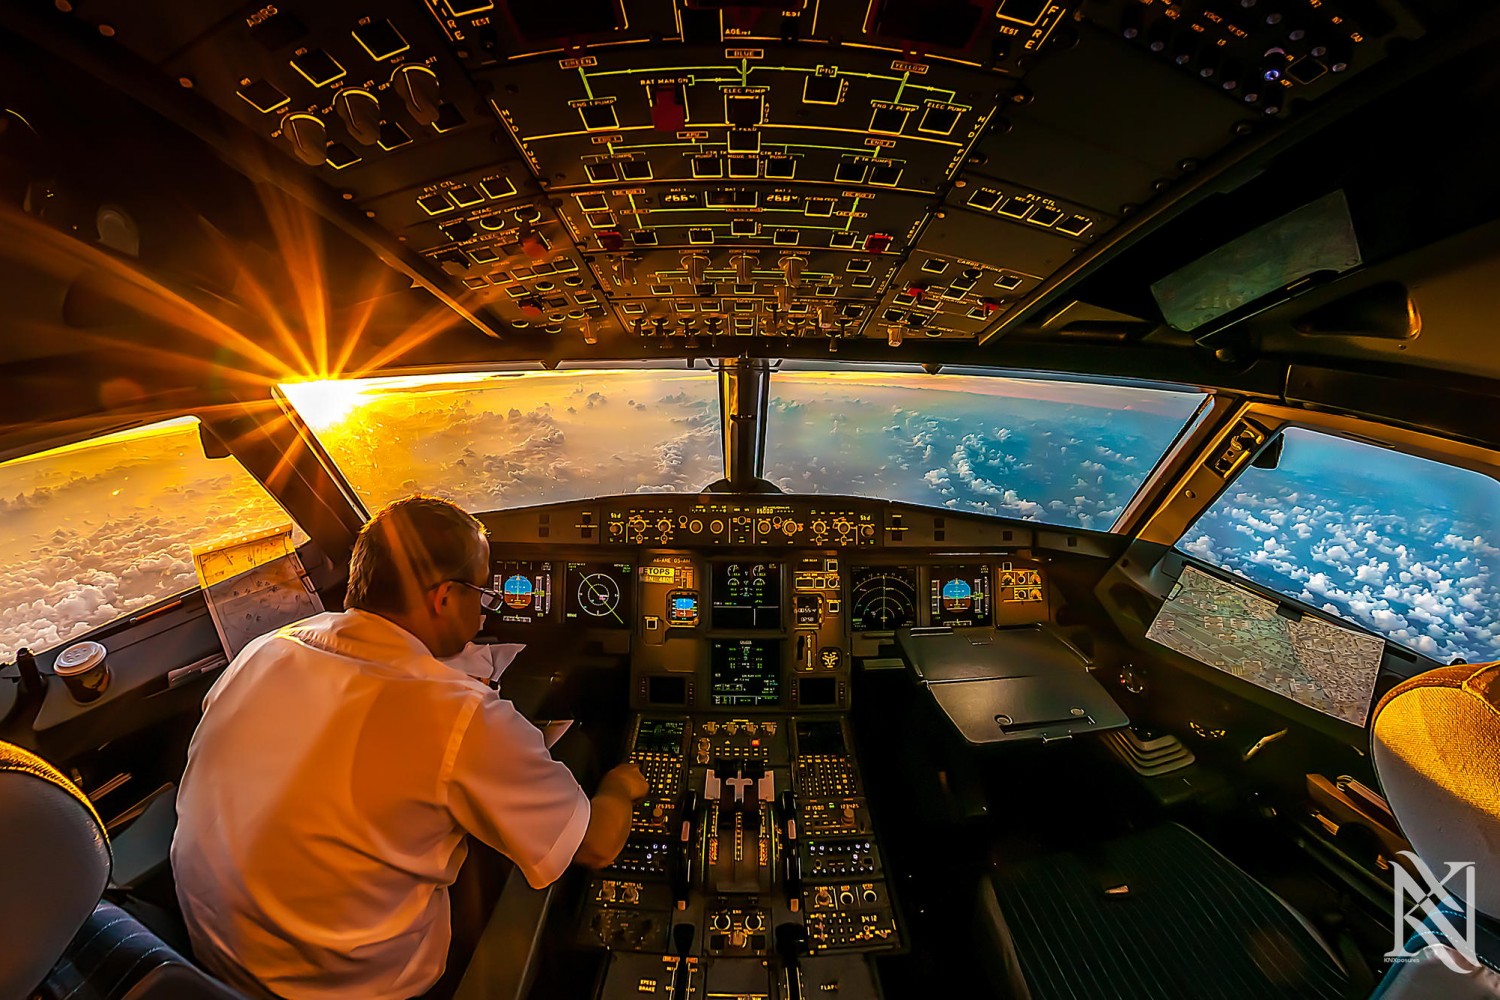 25 Awesome In-Flight Photos Taken by Pilots from the Cockpit